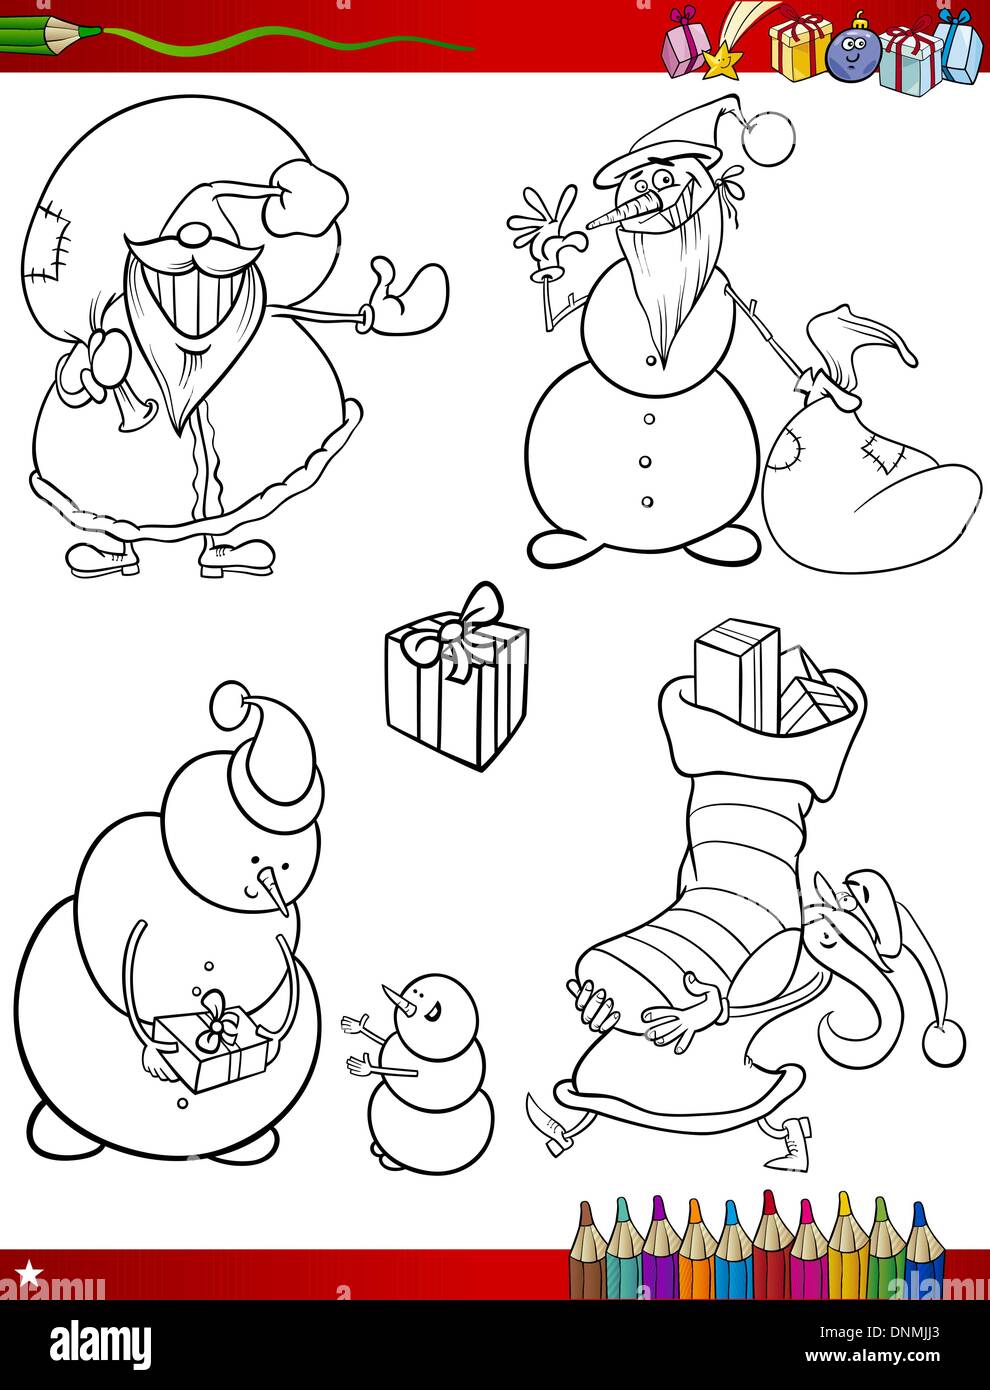 Coloring Book or Page Cartoon Illustration of Black and White Christmas Themes Set with Santa Claus or Papa Noel and Xmas Presen Stock Vector